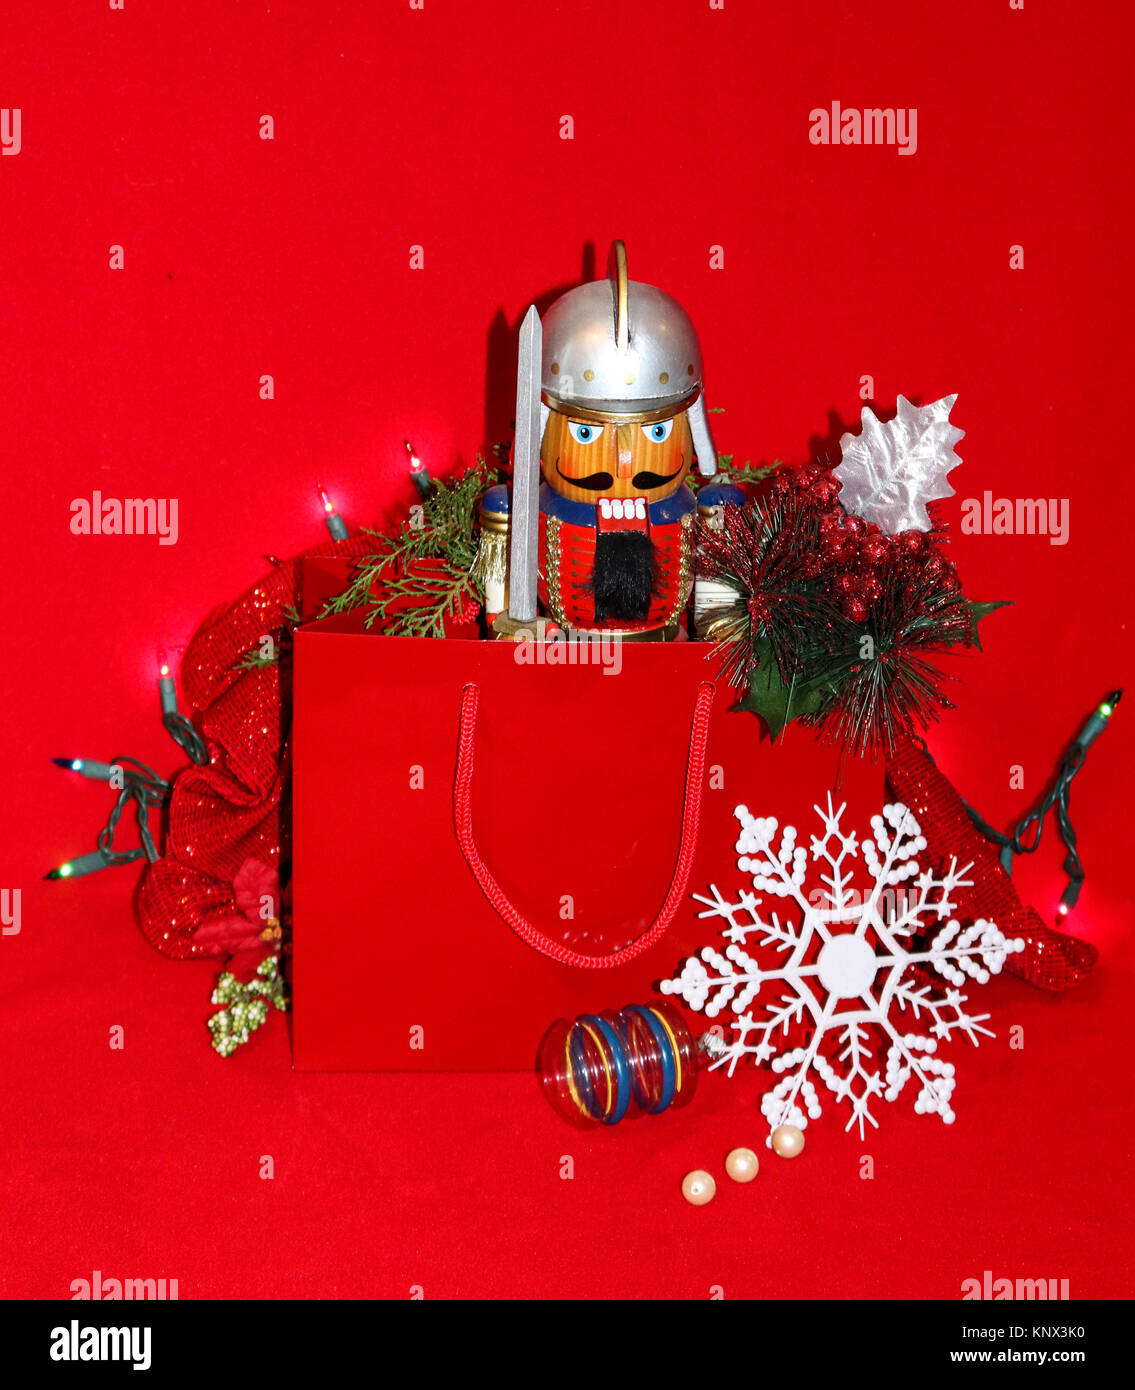 Roman Soldier Nutcracker present in gift bag on red background with snowflake, vintage ornament and Christms lights Stock Photo